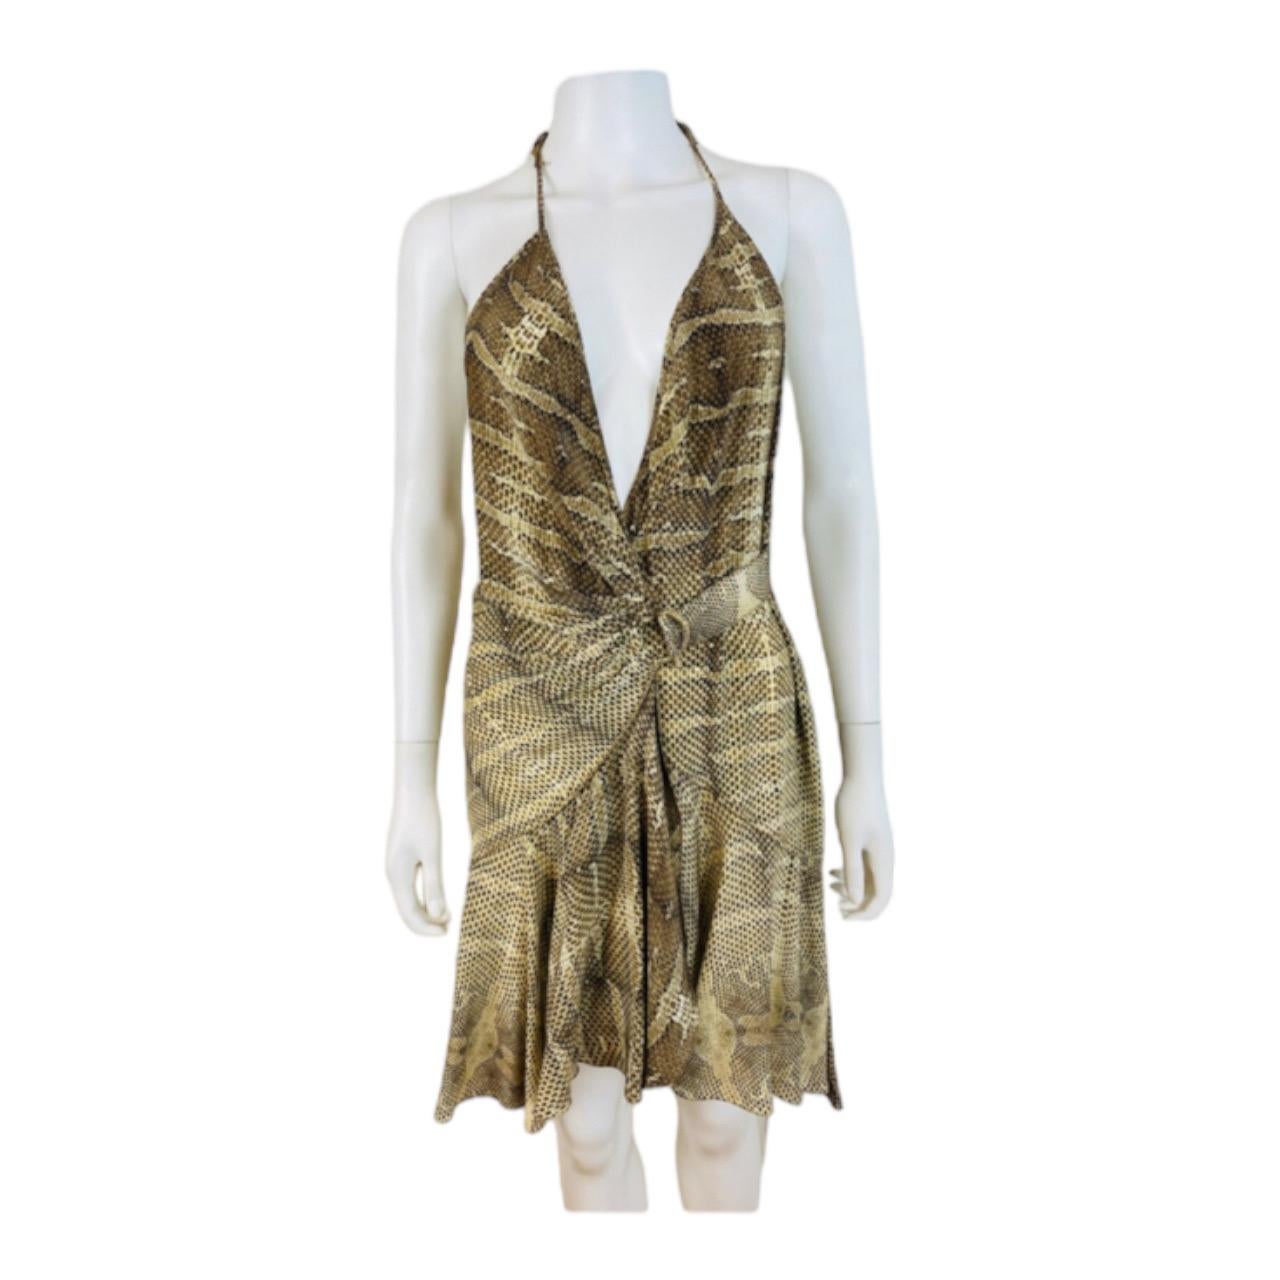 Vintage 2000s Y2K Roberto Cavalli Dress
Snake print silk fabric
Halter neckline
Deep V neckline
Wrap style dress with gold metal closure at the left hip
Mini length skirt with ruffled hem
Ruffle detail on the upper back
Unlined

Marked 42,